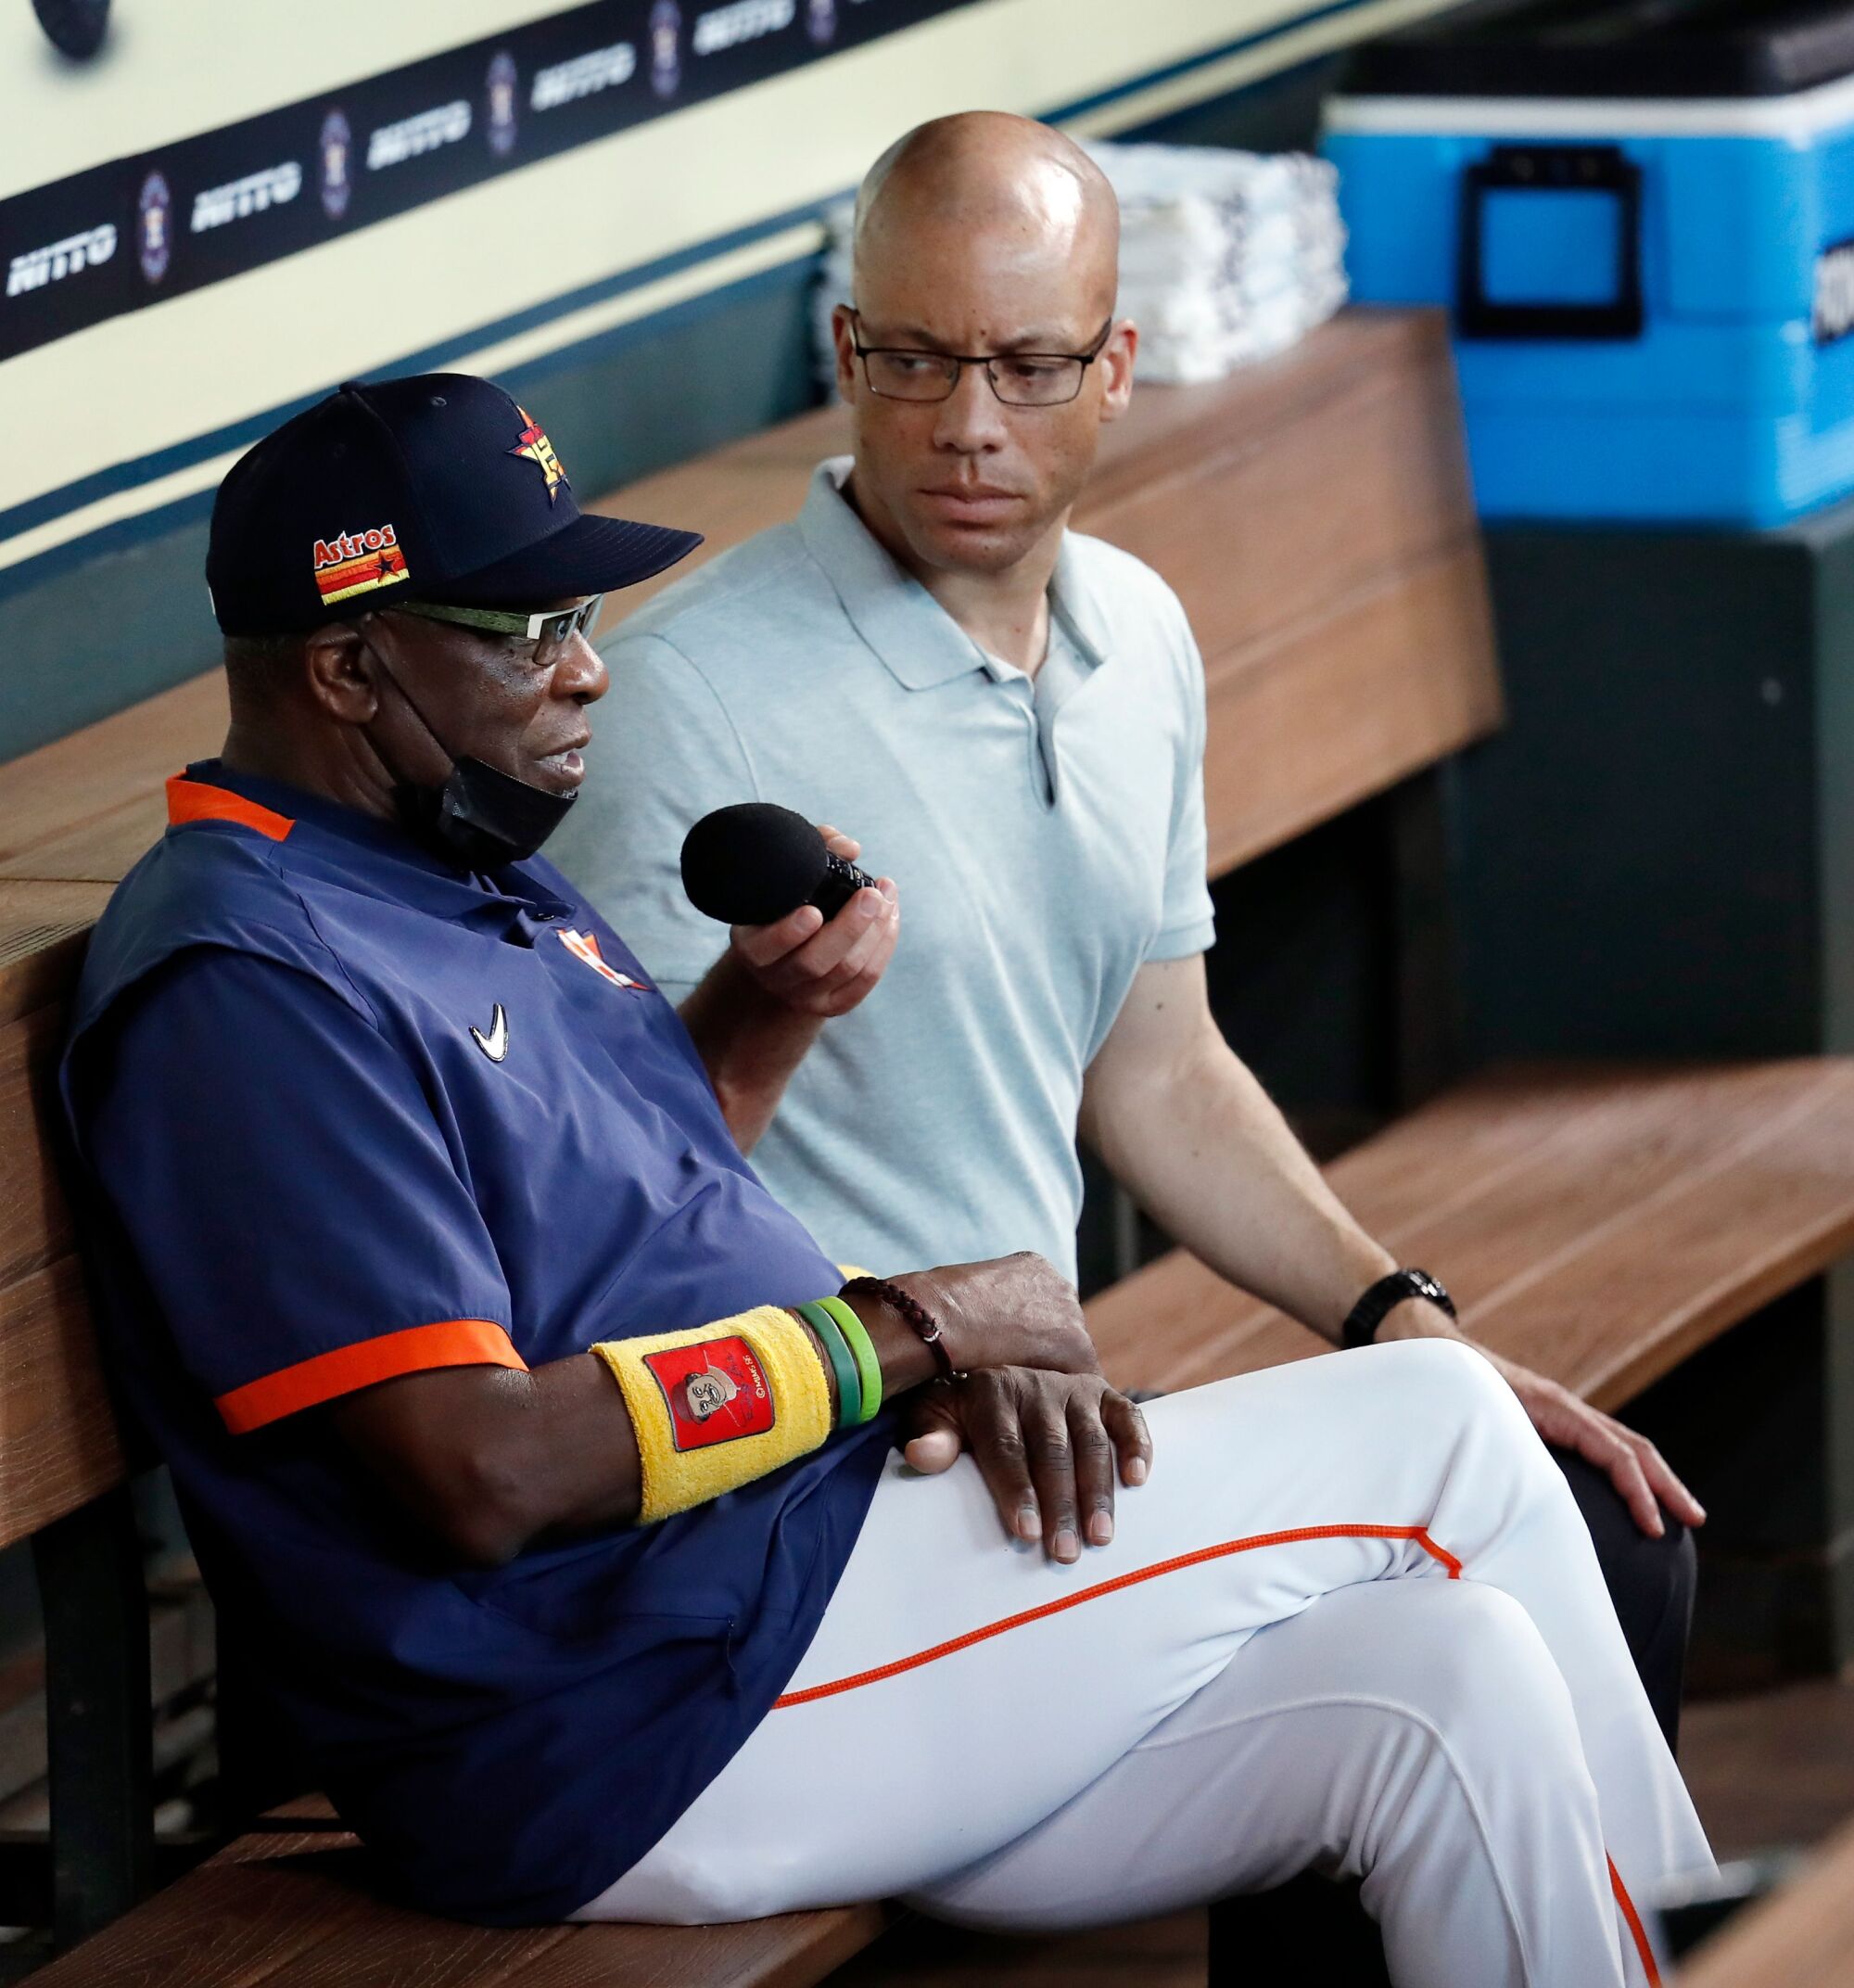 Astros manager Dusty Baker Jr. is interviewed by Robert Ford in the dugout before a game.